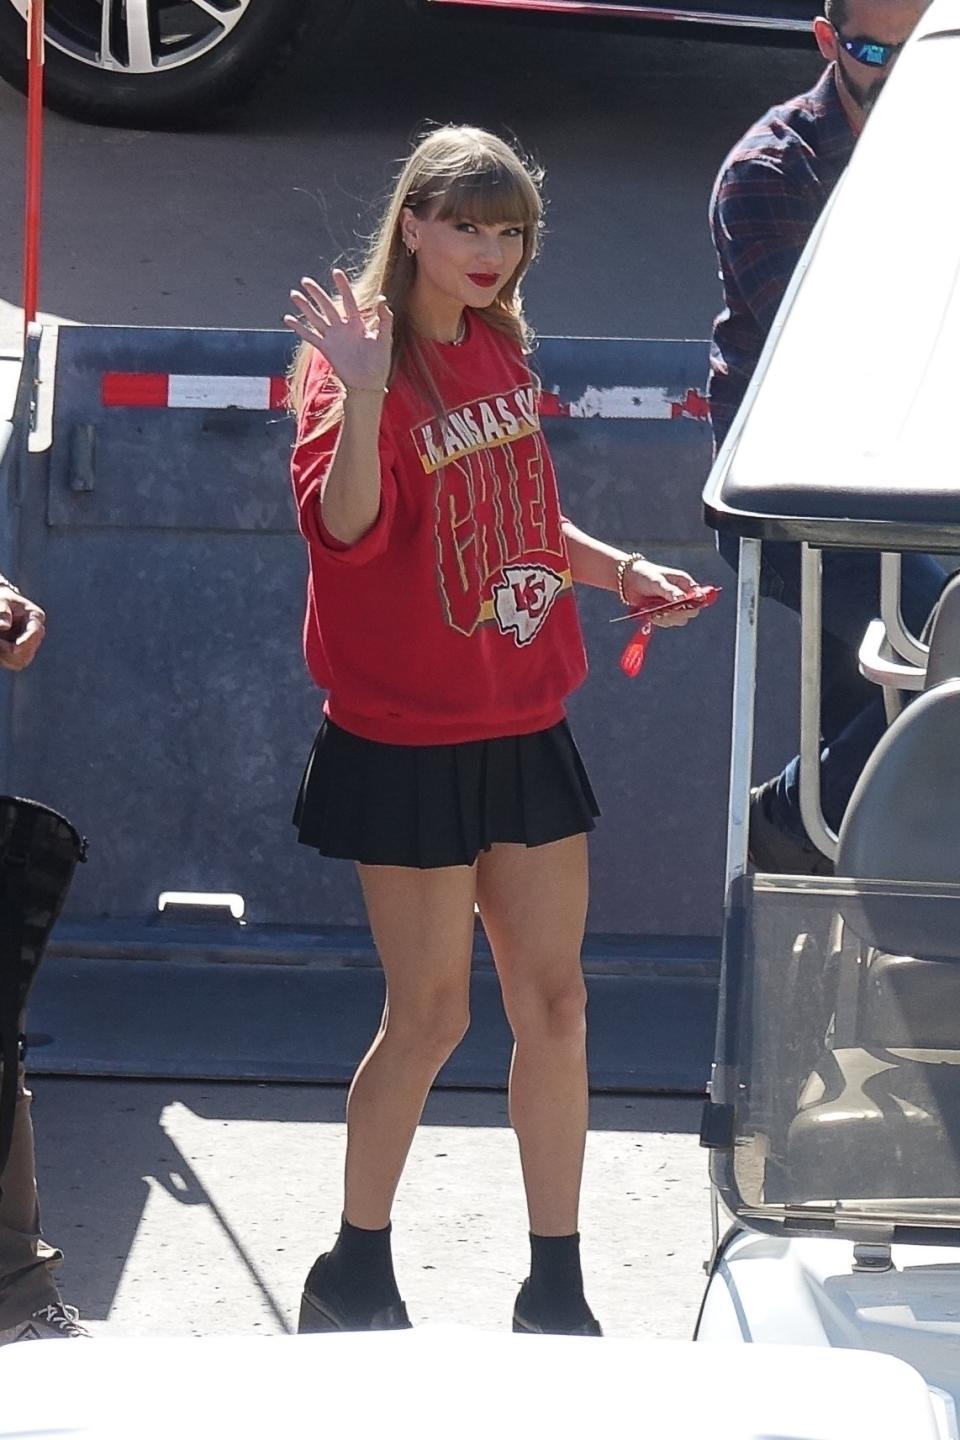 Taylor is wearing a Chief's sweatshirt with a short pleated skirt